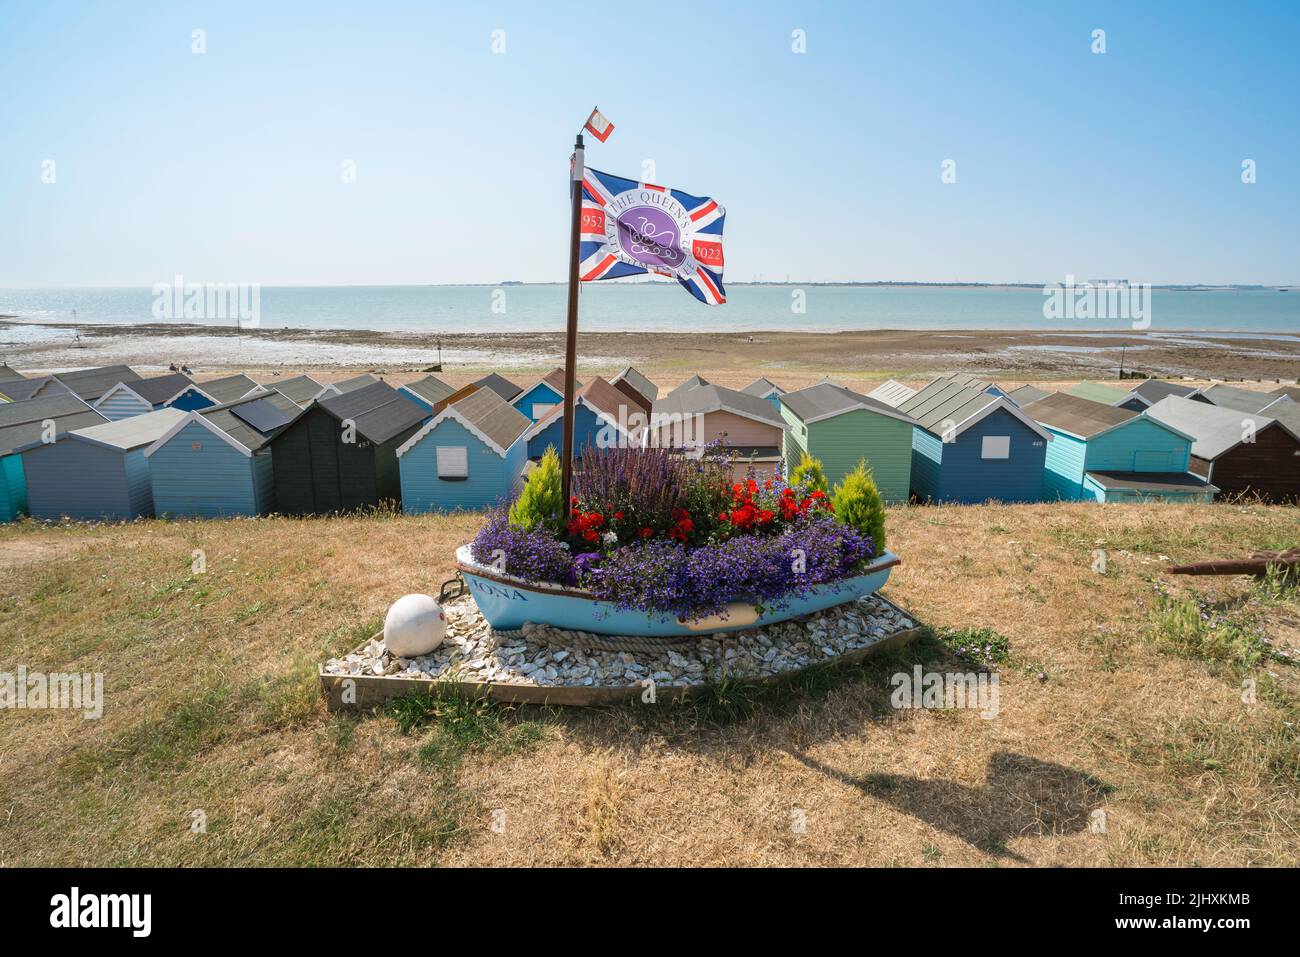 UK culture life England, view in summer of a nautical floral display commemorating the Queen's Platinum Jubilee, West Mersea beach, Essex, England, UK Stock Photo